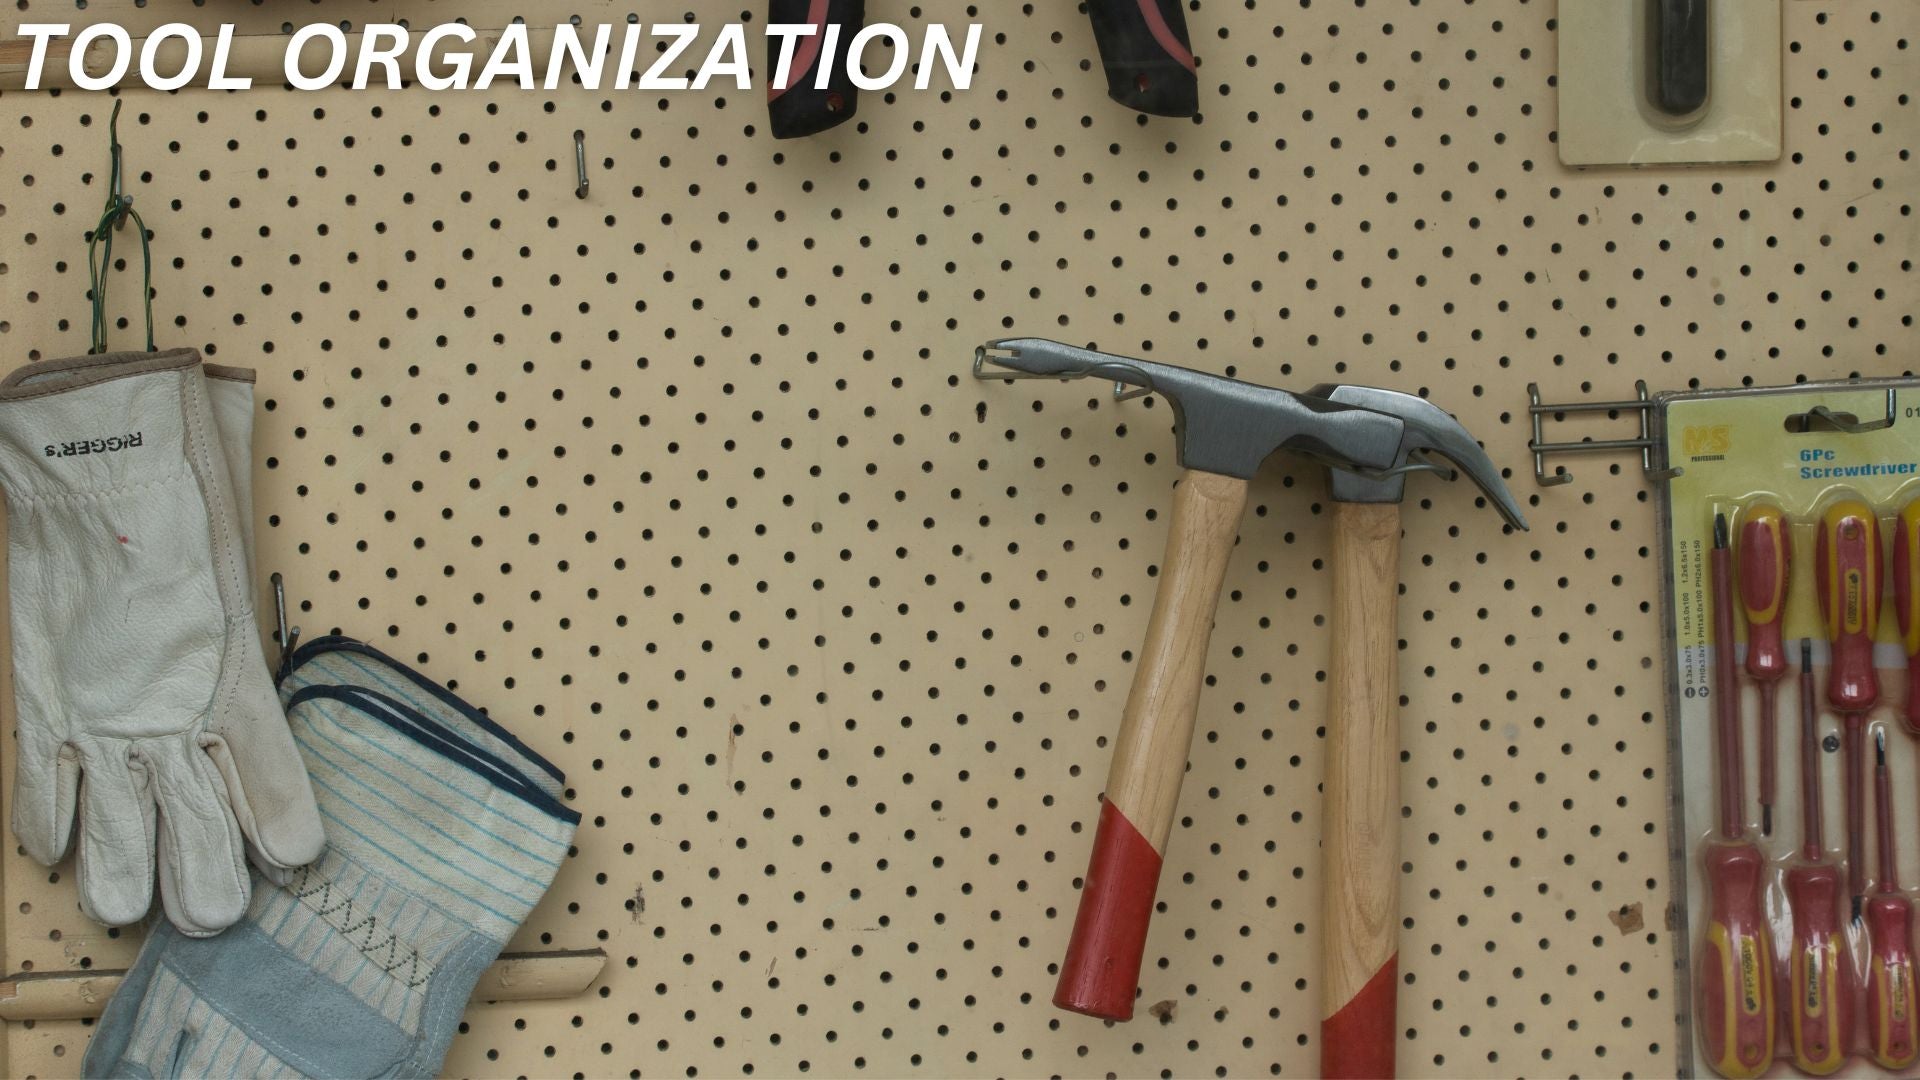 DIY Tool Organization: Efficient Ways to Store and Manage Your Tools